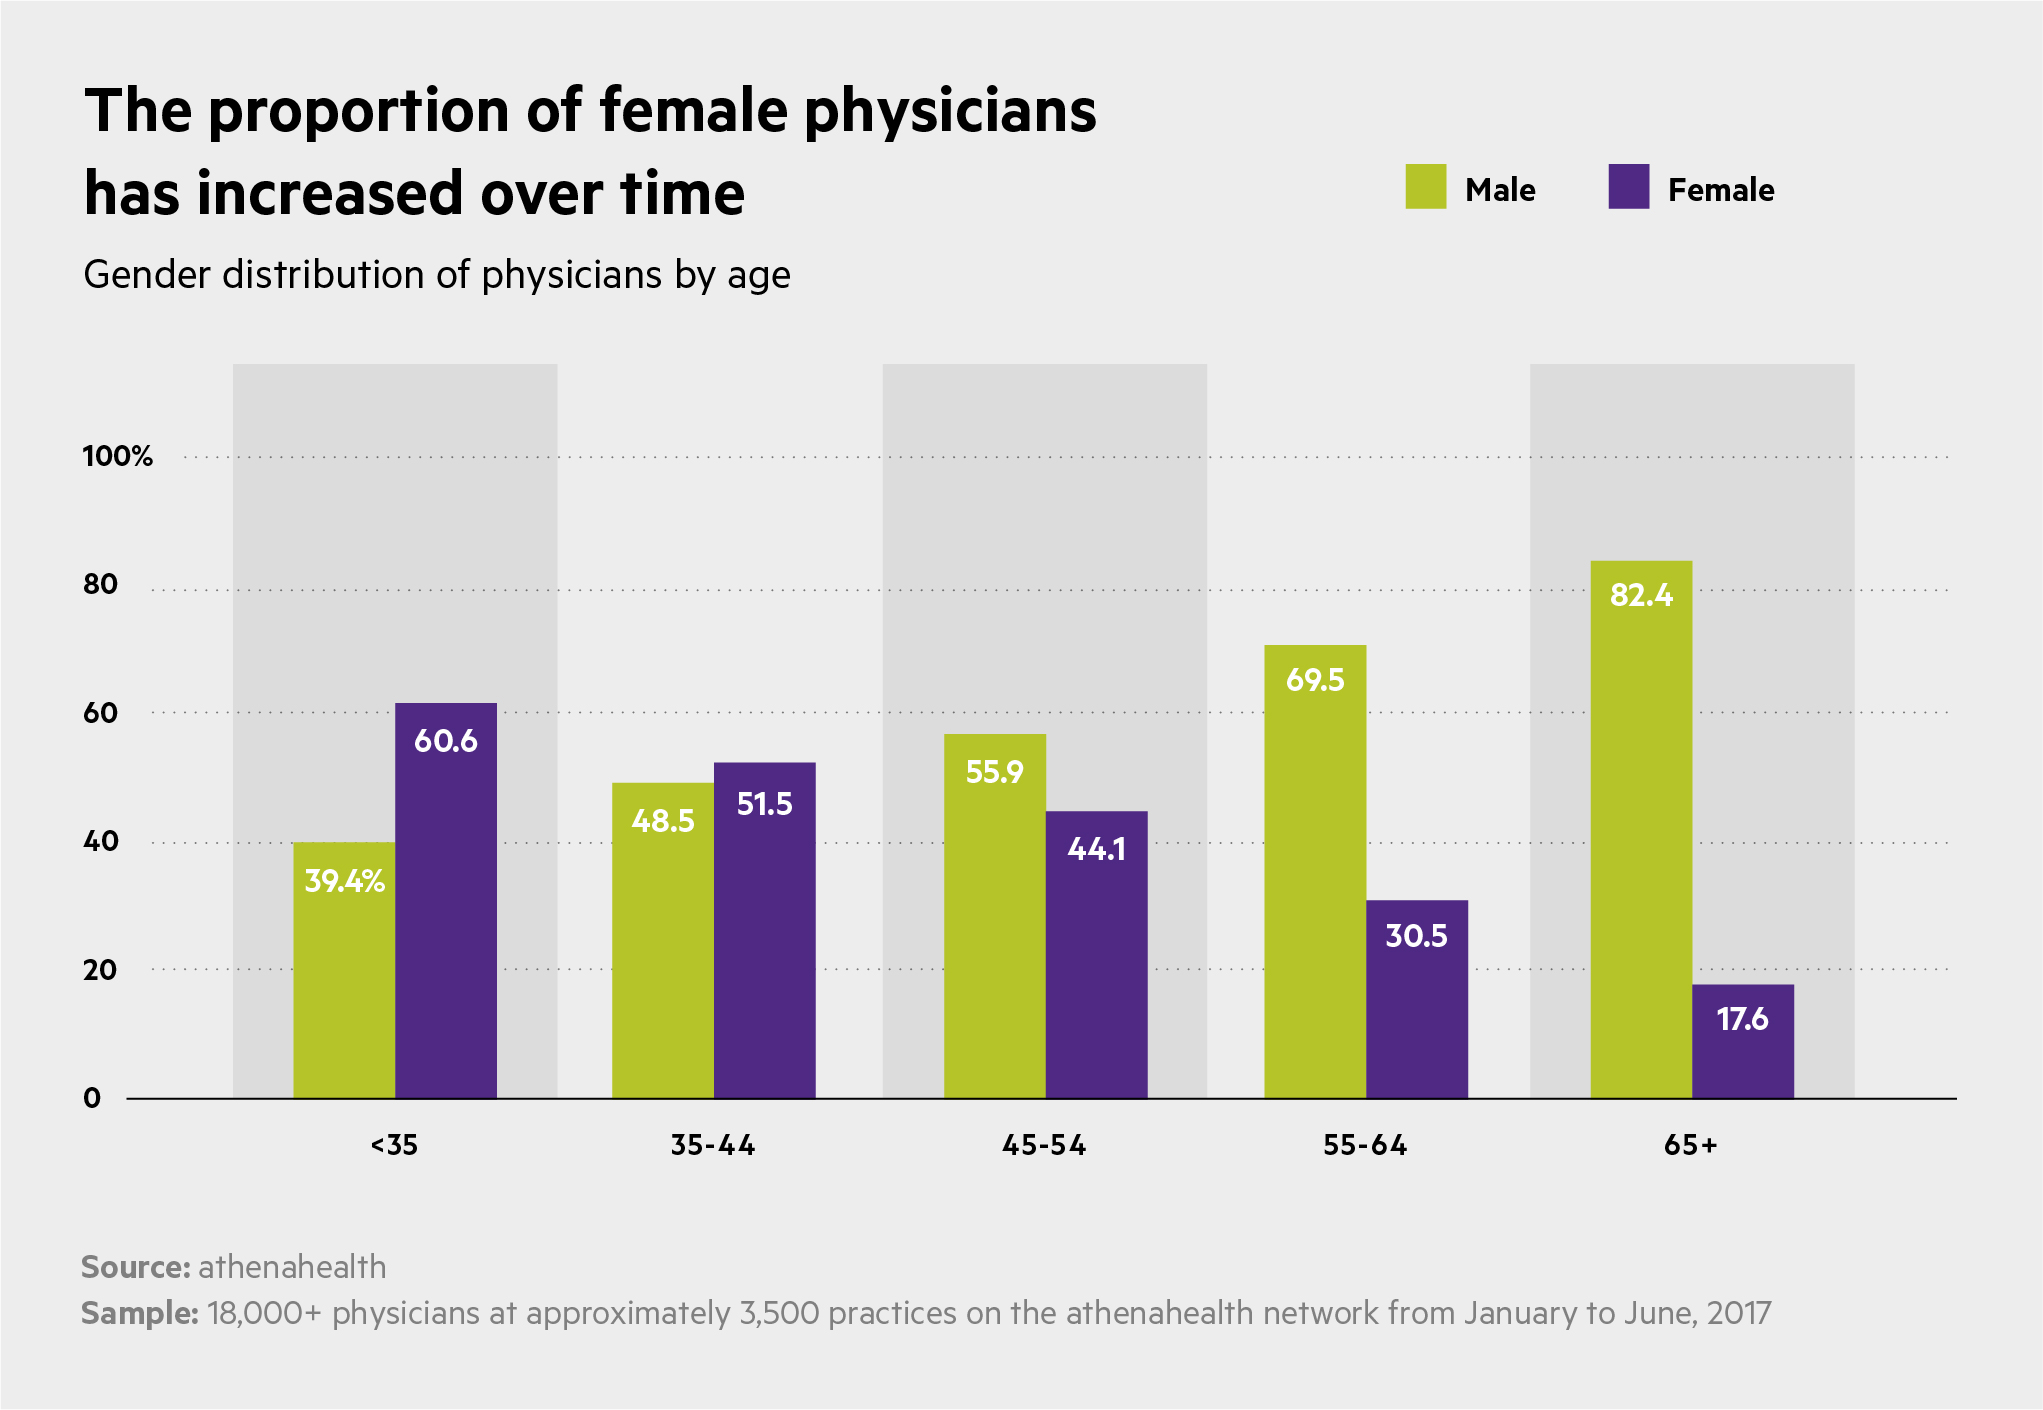 The proportion of female physicians has increased over time